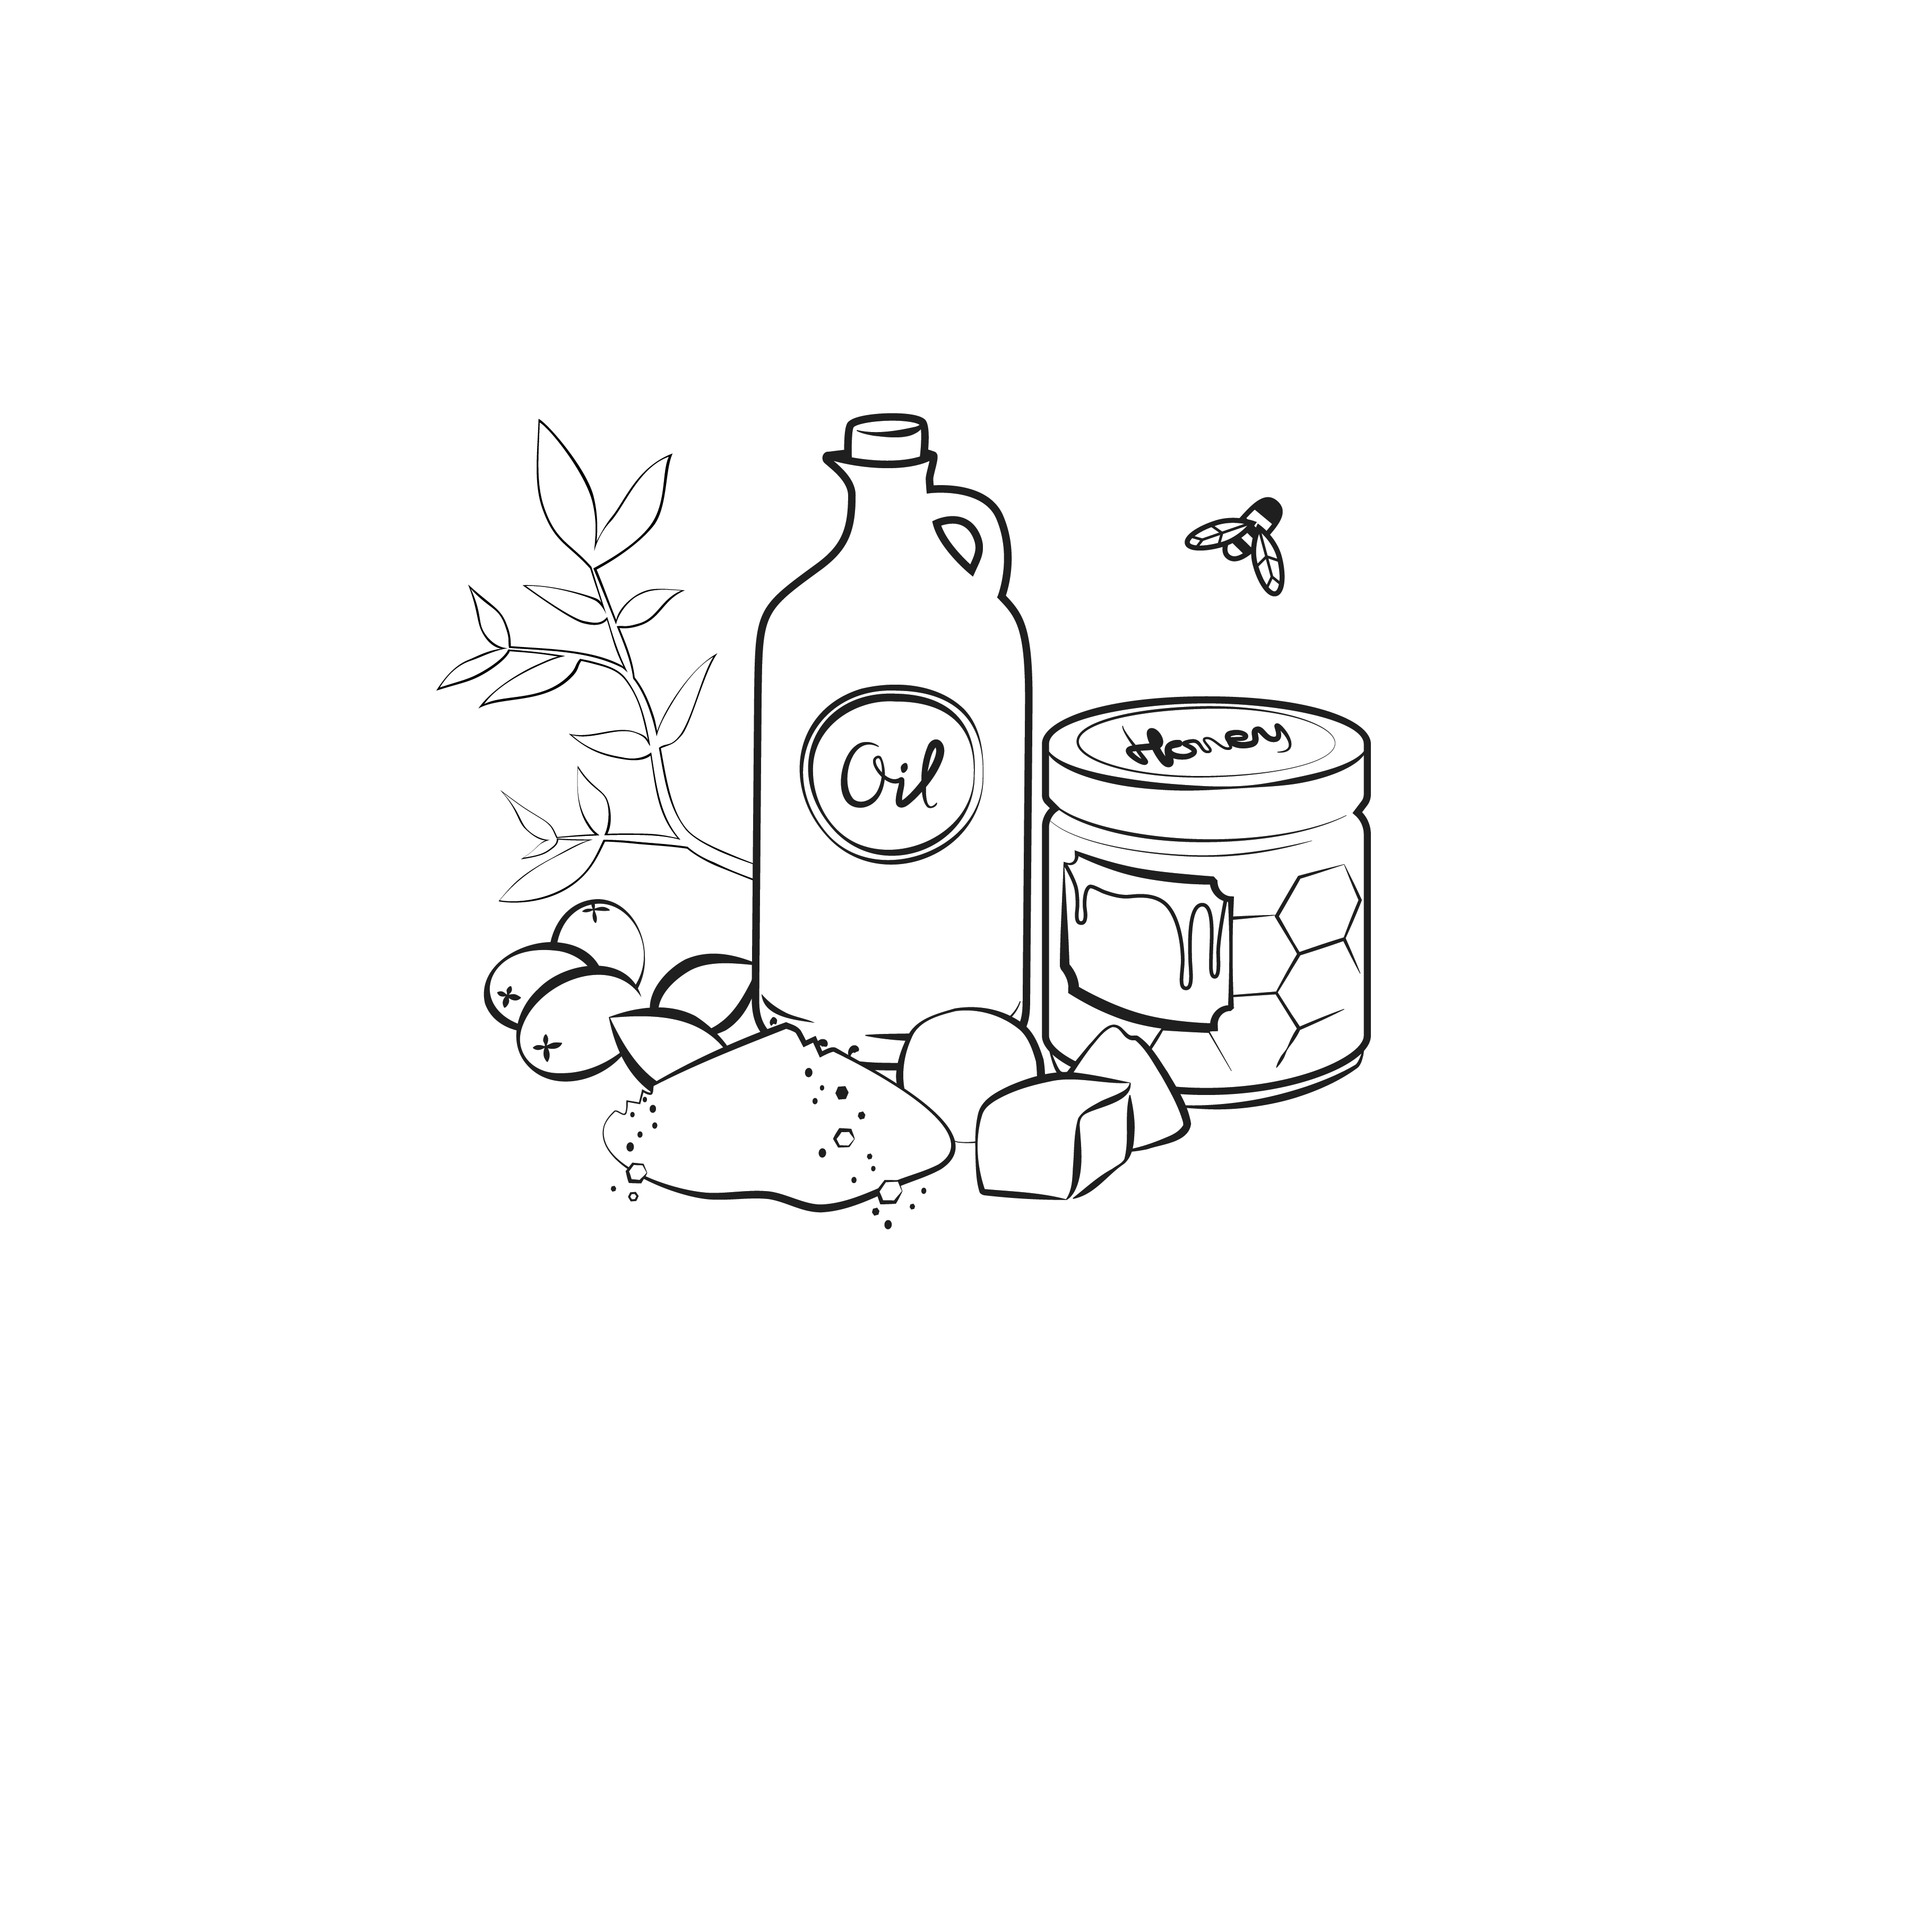 Nords